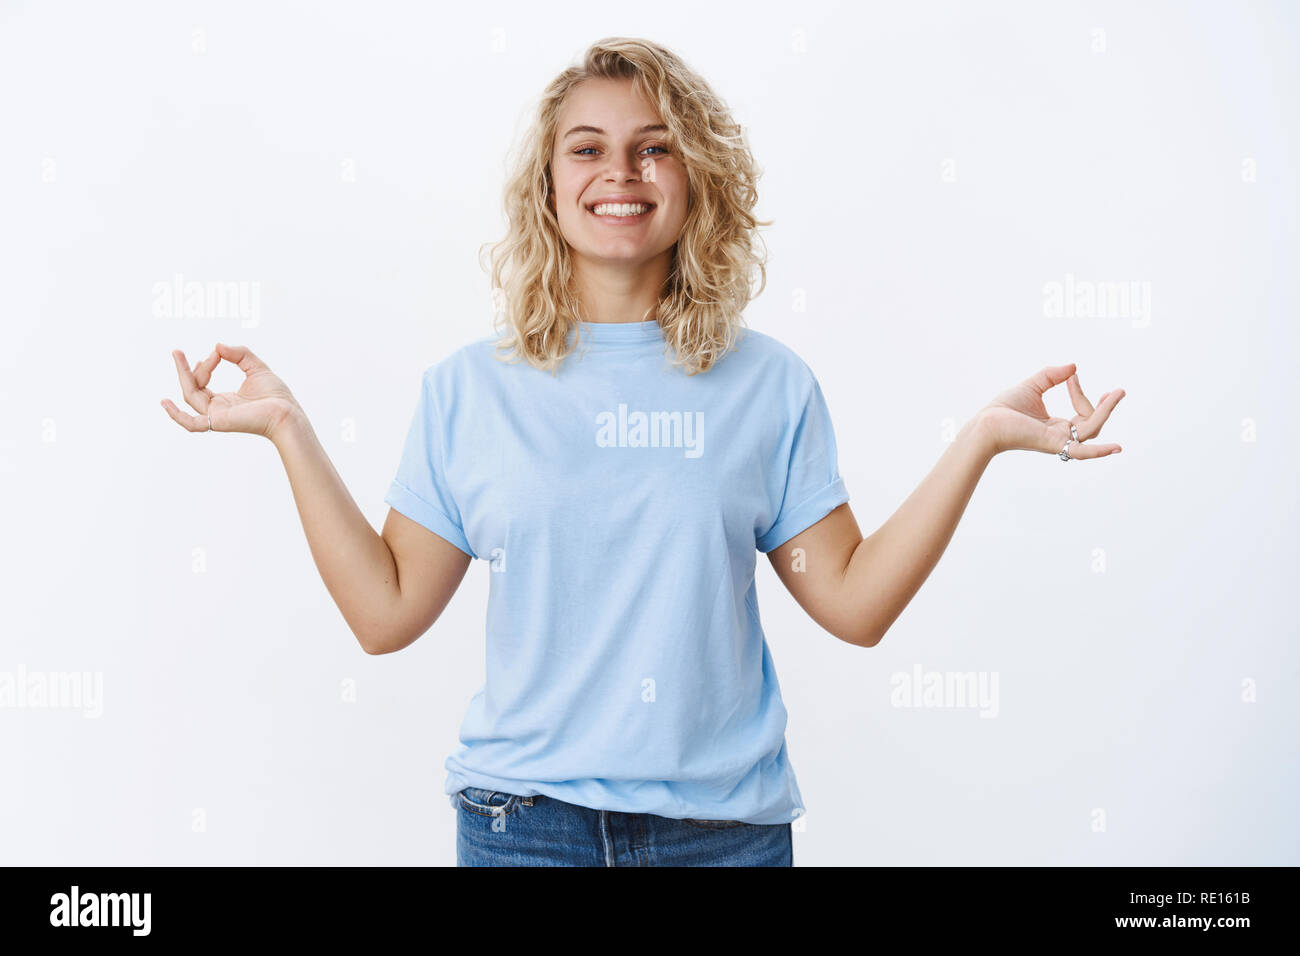 Keep calm and carry on. Portrait of optimistic relieved and stress-free good-looking female with blond hair smiling pleased and relaxed, standing in m Stock Photo